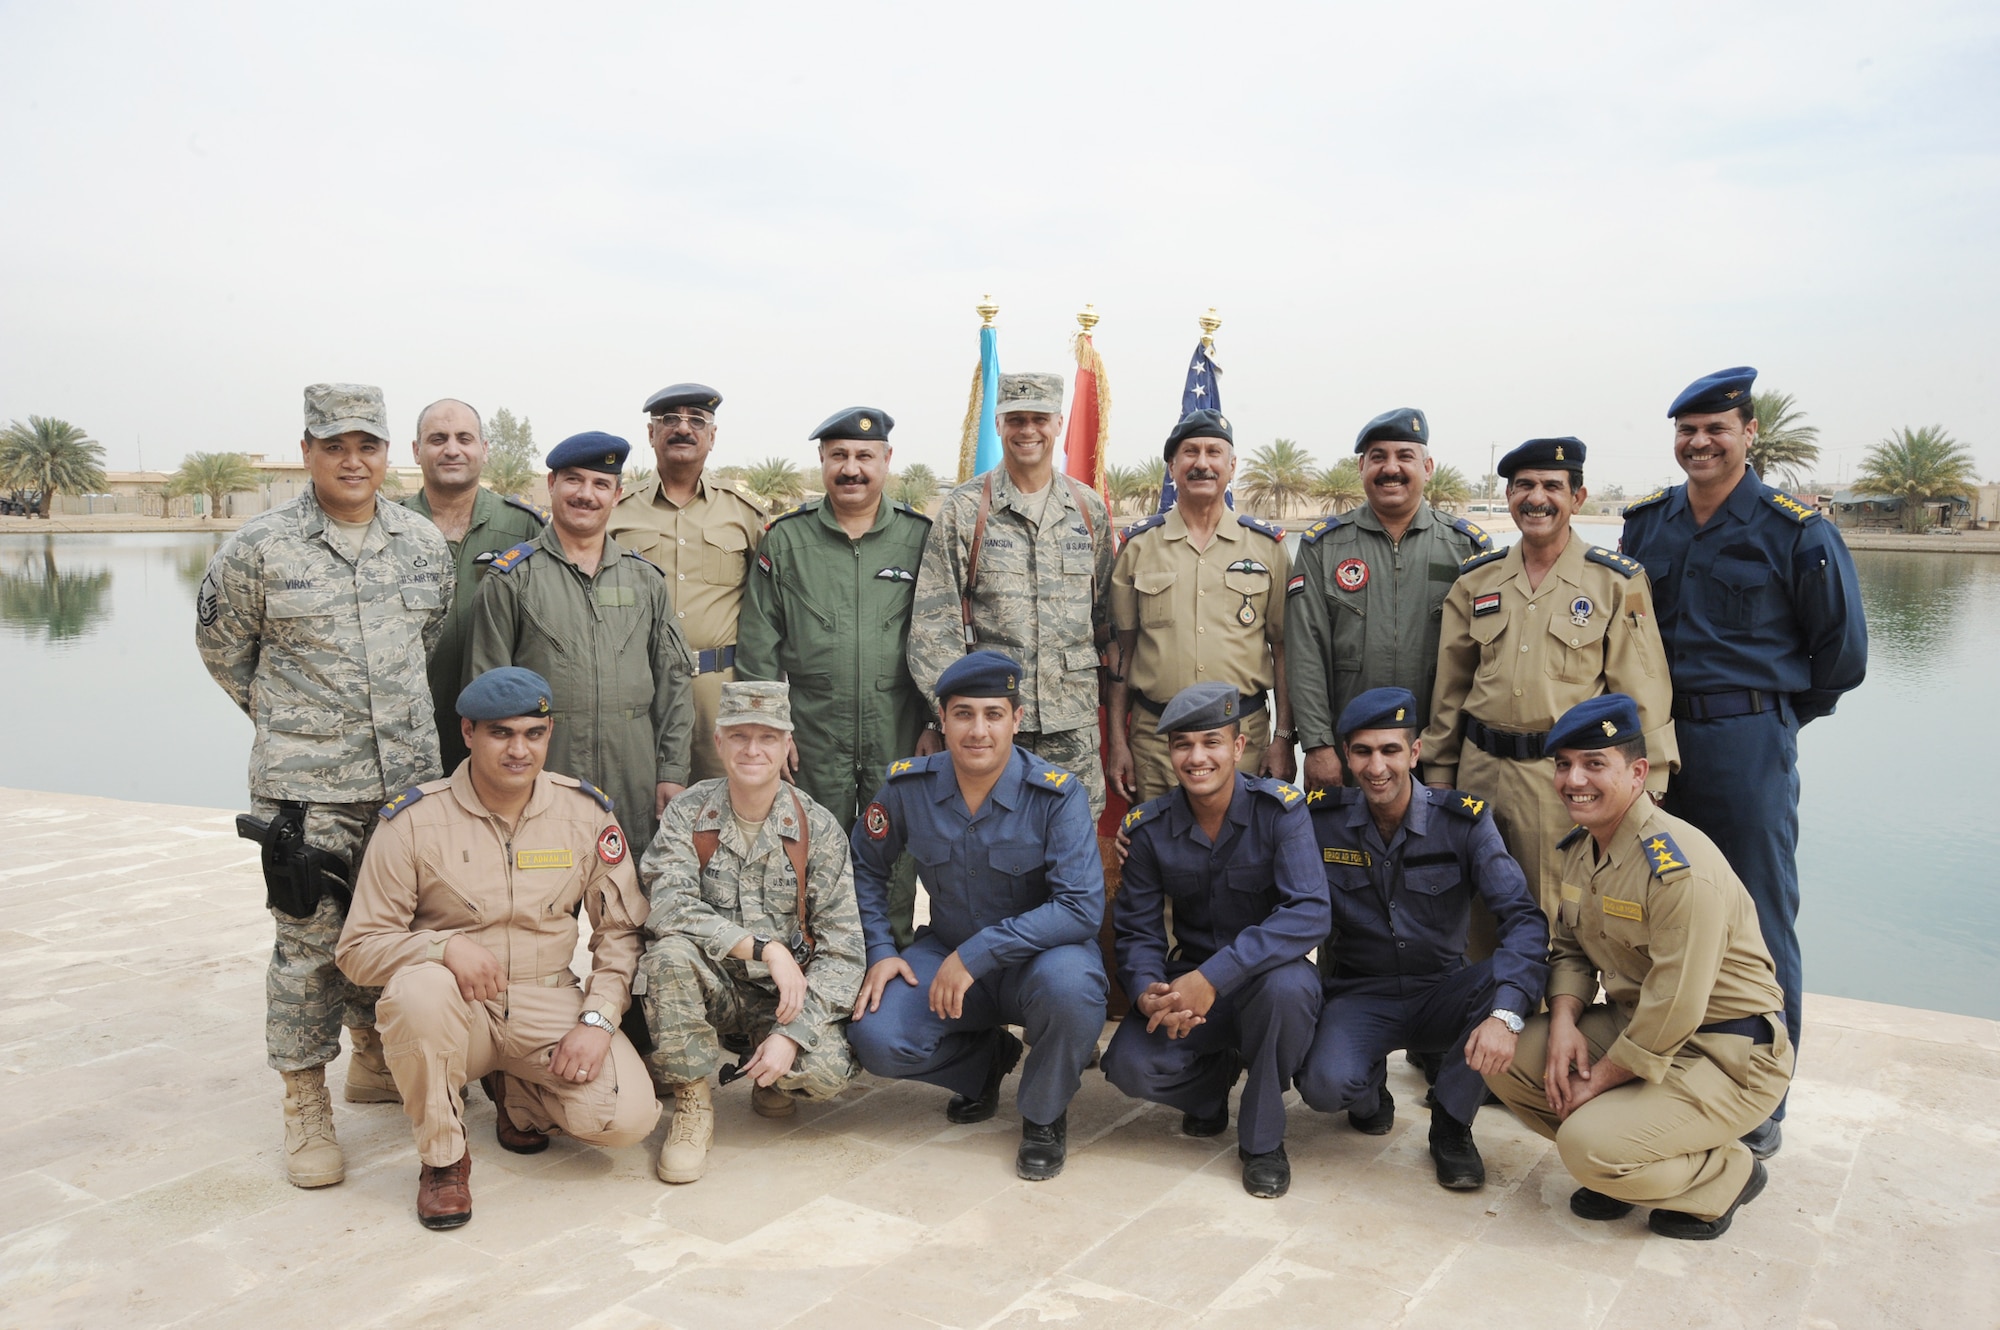 Iraqi air force officers pose with their U.S. Air Force instructors at Camp Victory, Iraq, March 25, 2010, following their graduation from a 52-day meteorology course. The graduates will be sent to different locations throughout Iraq for 30 days of on-the-job training. Once the training is complete, some of the weather advisory officers will become instructors while others will begin their weather advisory mission for the Iraqi military. (U.S. Air Force photo/Master Sgt. Trish Bunting)